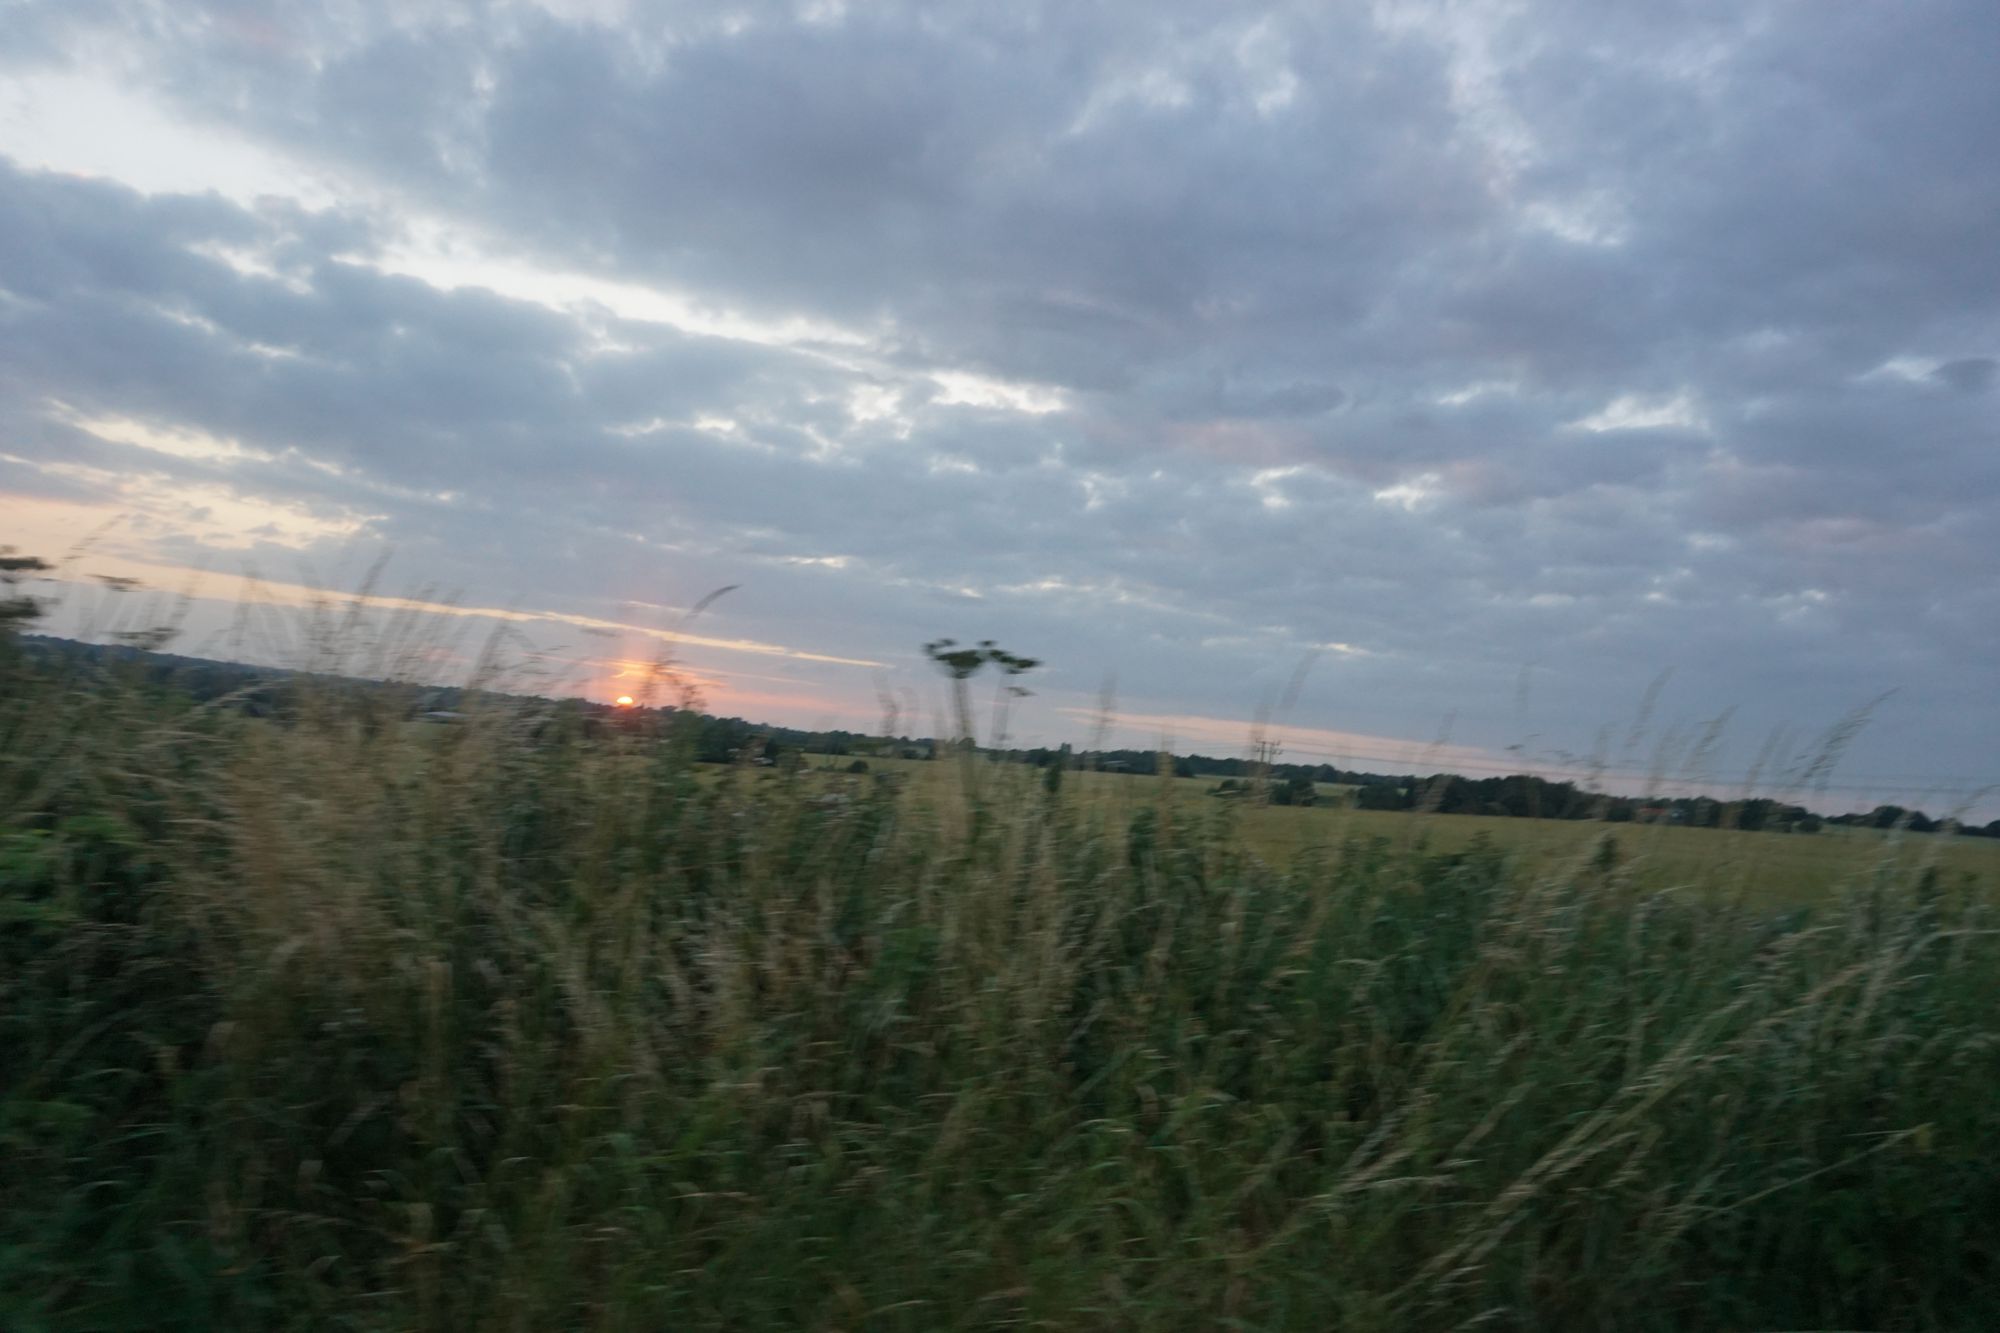 Seen across a field, the sun sets dimly, an orange circle set amongst a sky laden with grey clouds.